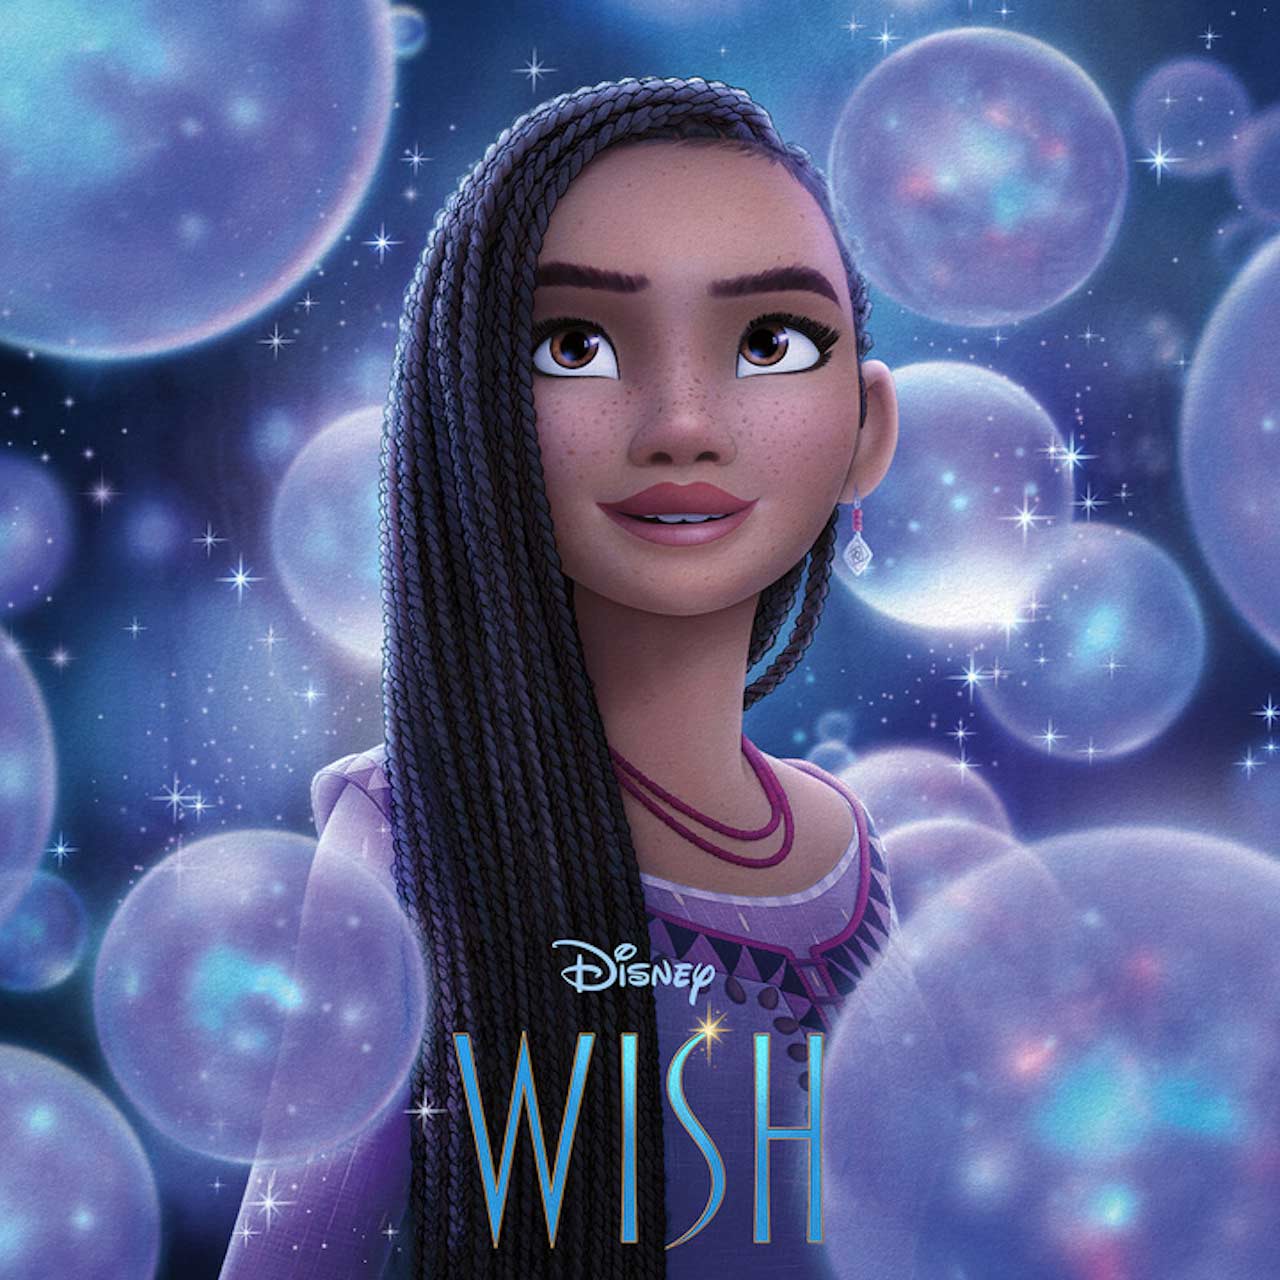 Disney's Wish: Plot, Cast, Release Date, and Everything Else We Know